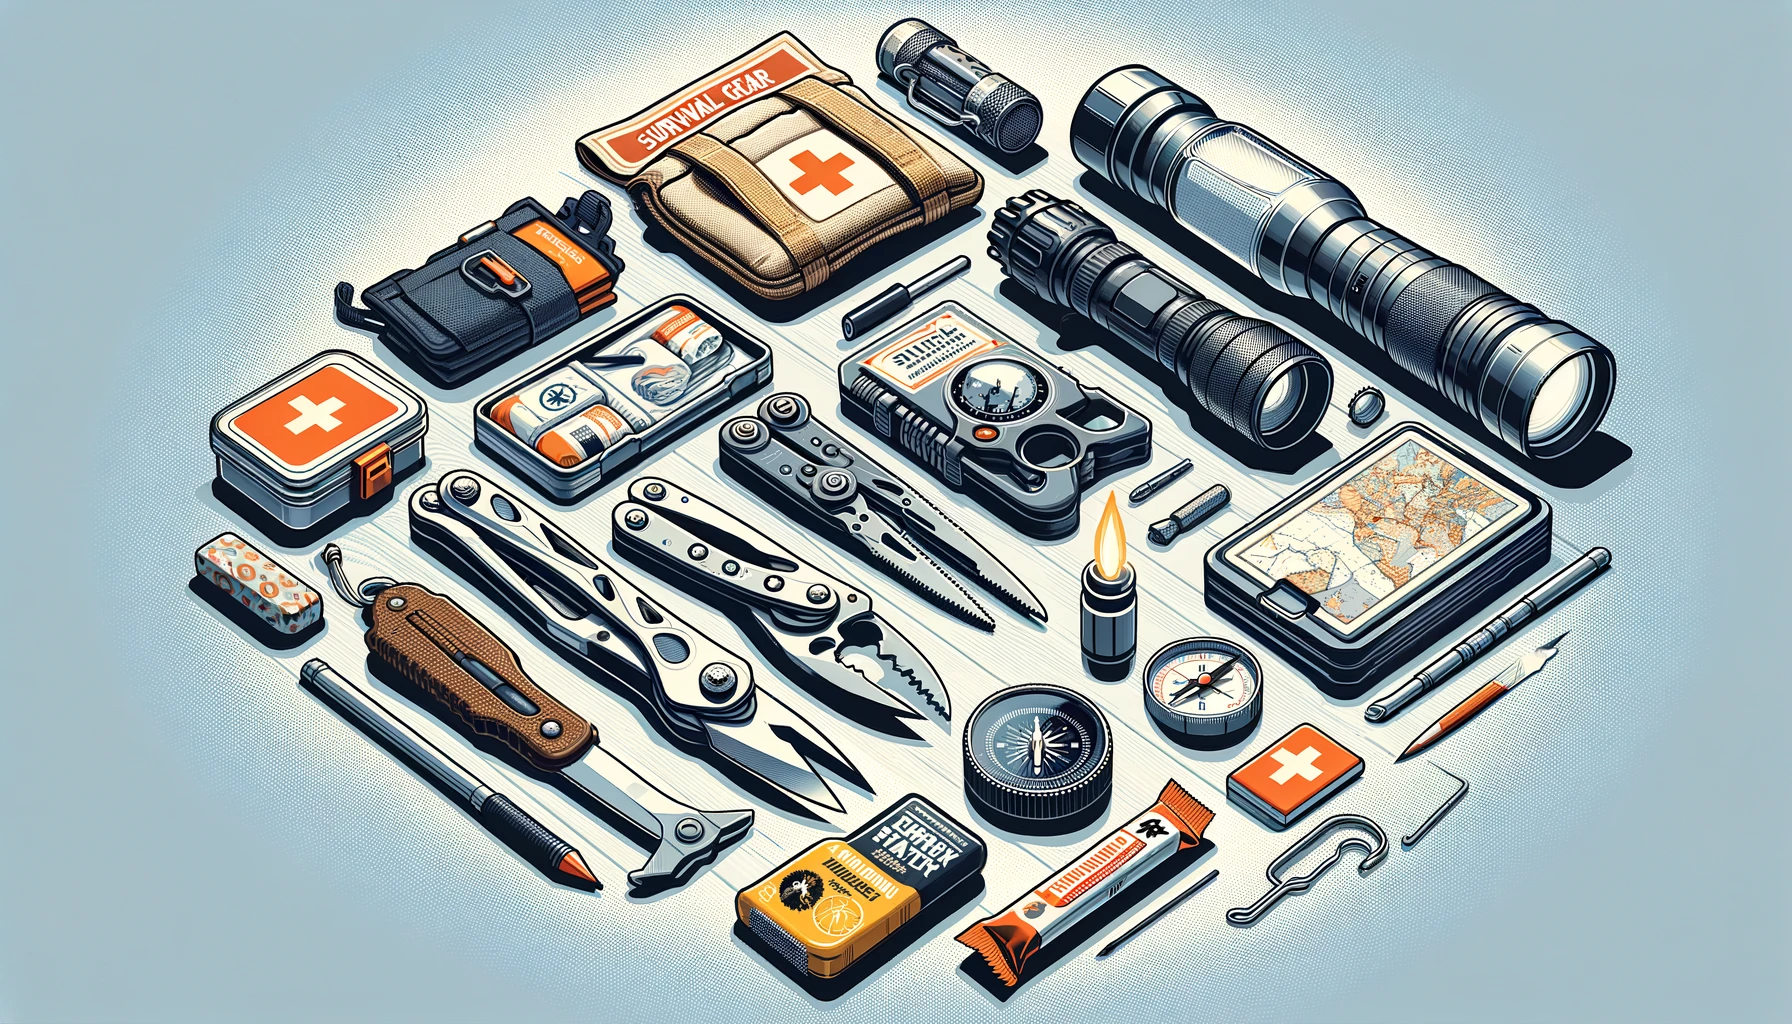 Survival Gear Must-Haves